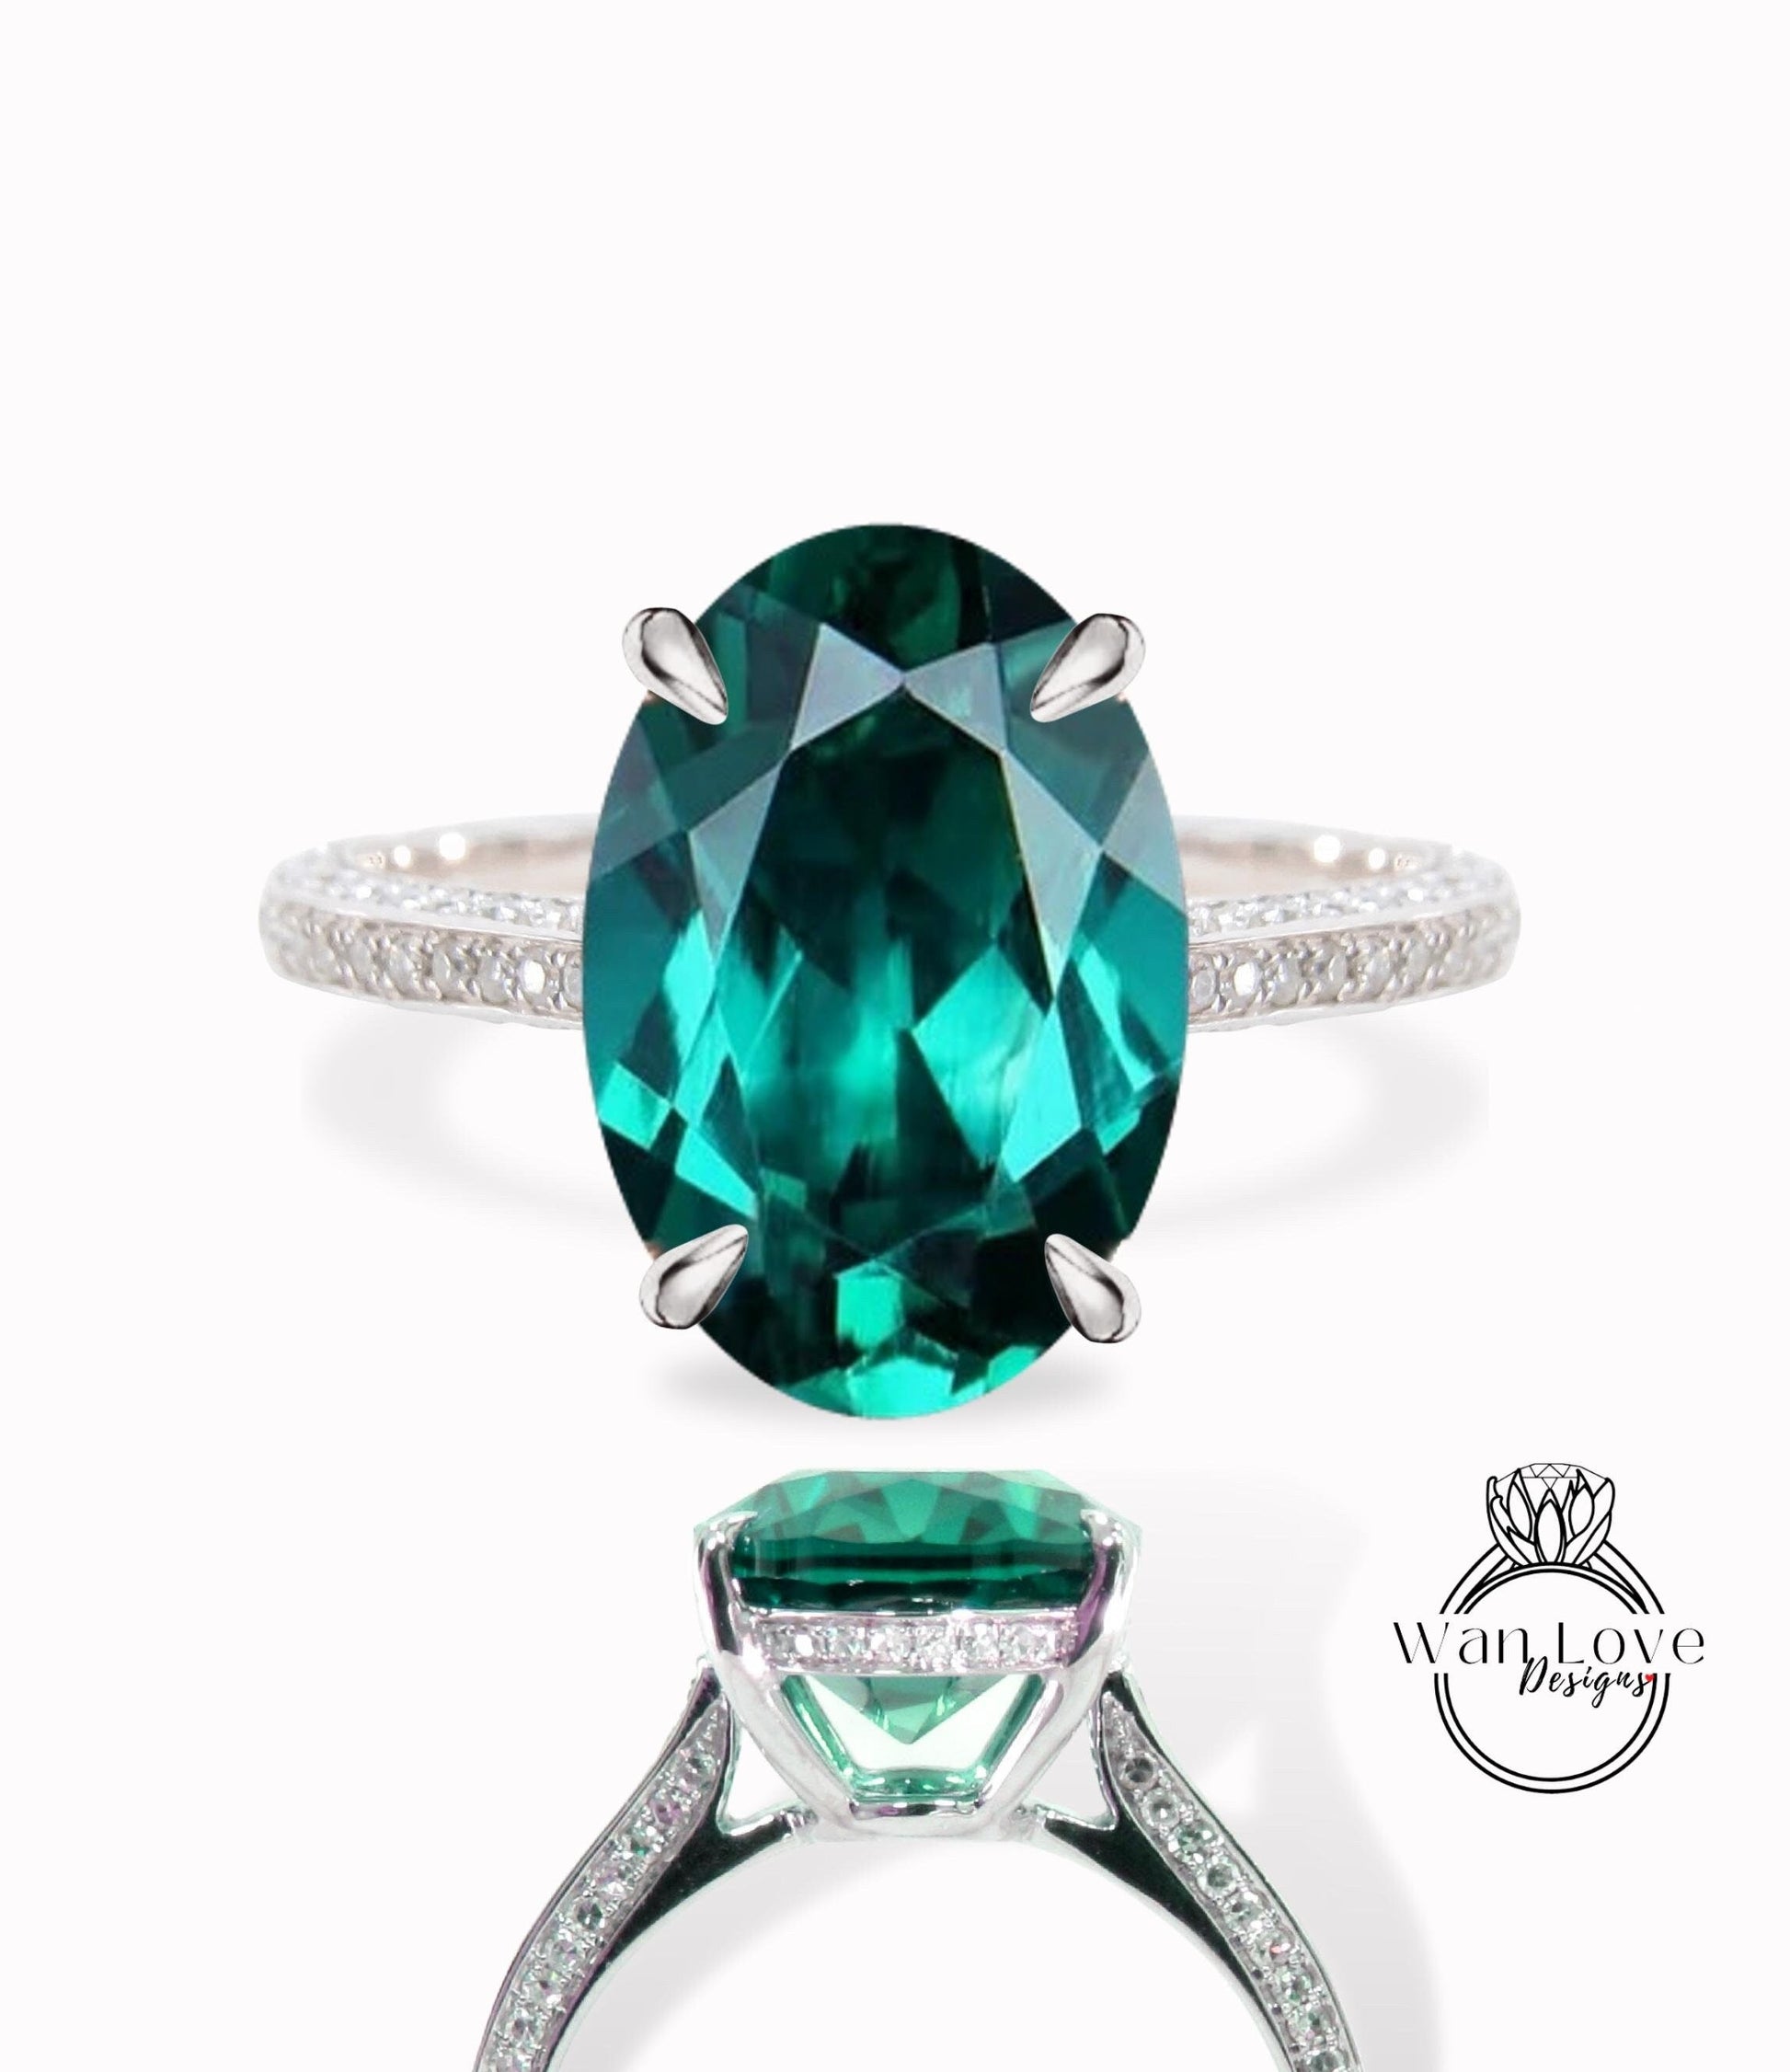 Oval Emerald Engagement Ring Celebrity style Ring Vintage Diamonds Side Hidden Halo Wedding Ring Art Deco Anniversary Gift for her Wan Love Designs